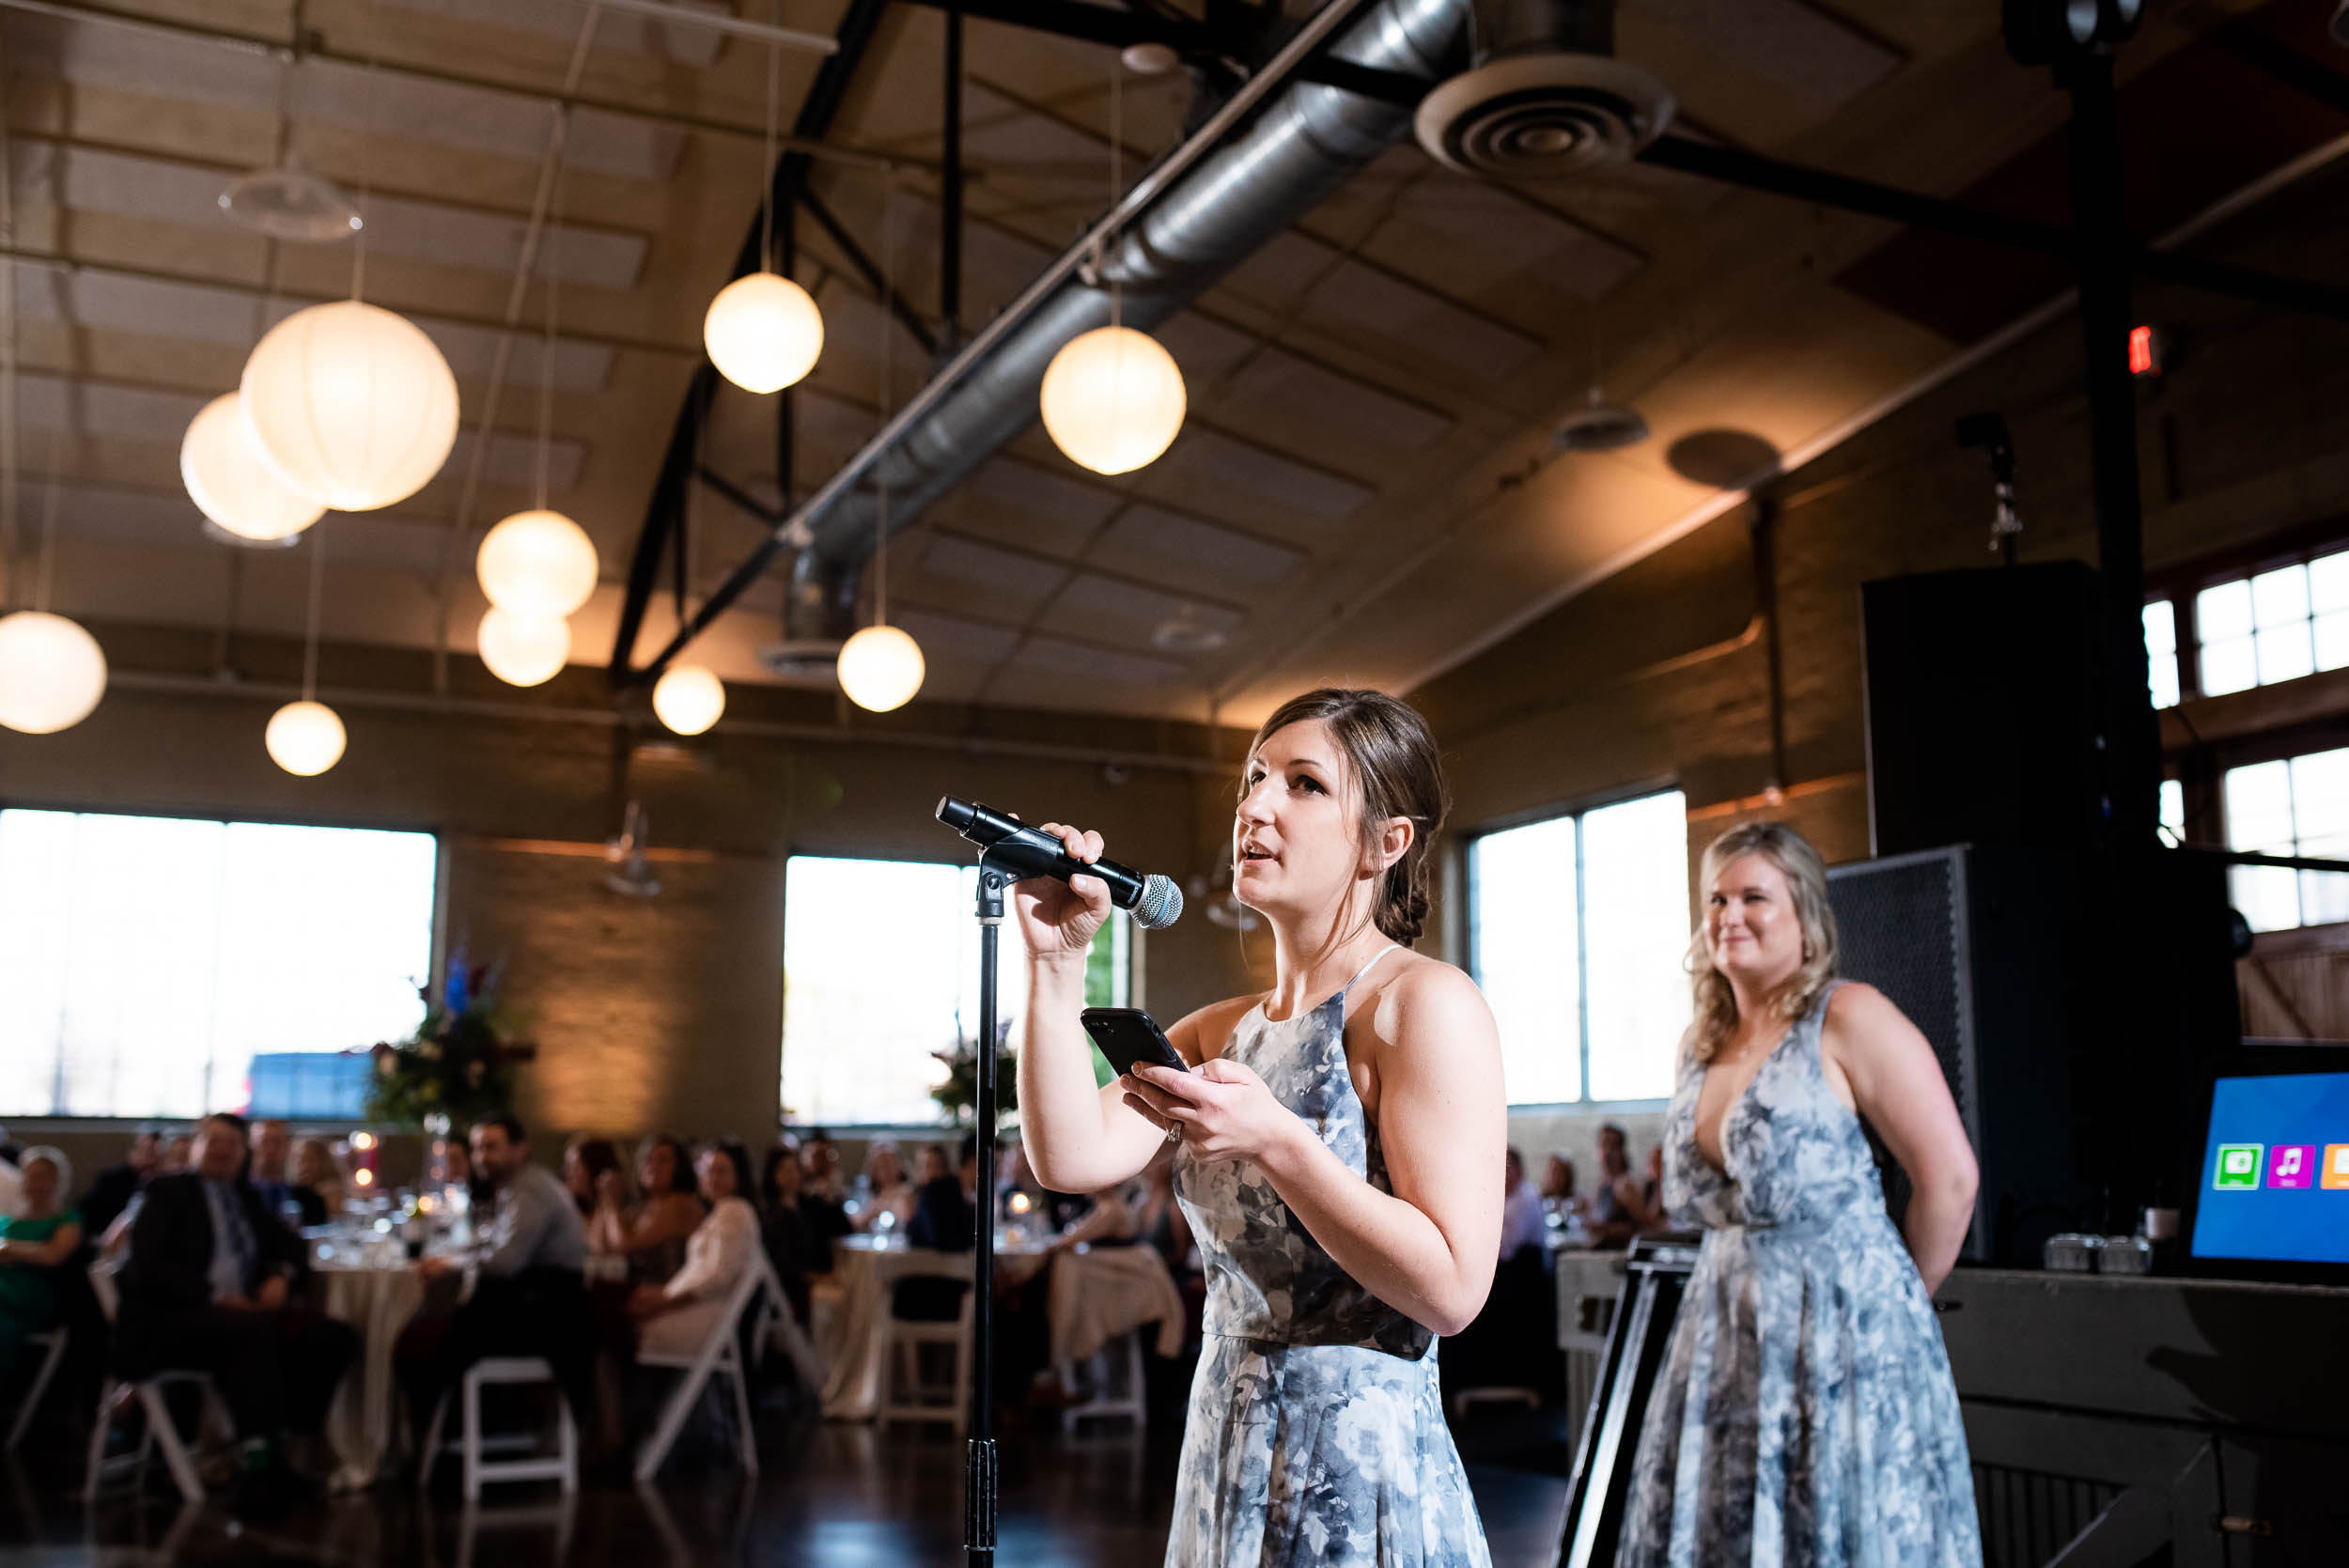 Wedding speeches: Modern industrial Chicago wedding inside Prairie Street Brewhouse captured by J. Brown Photography. Find more wedding ideas at jbrownphotography.com!